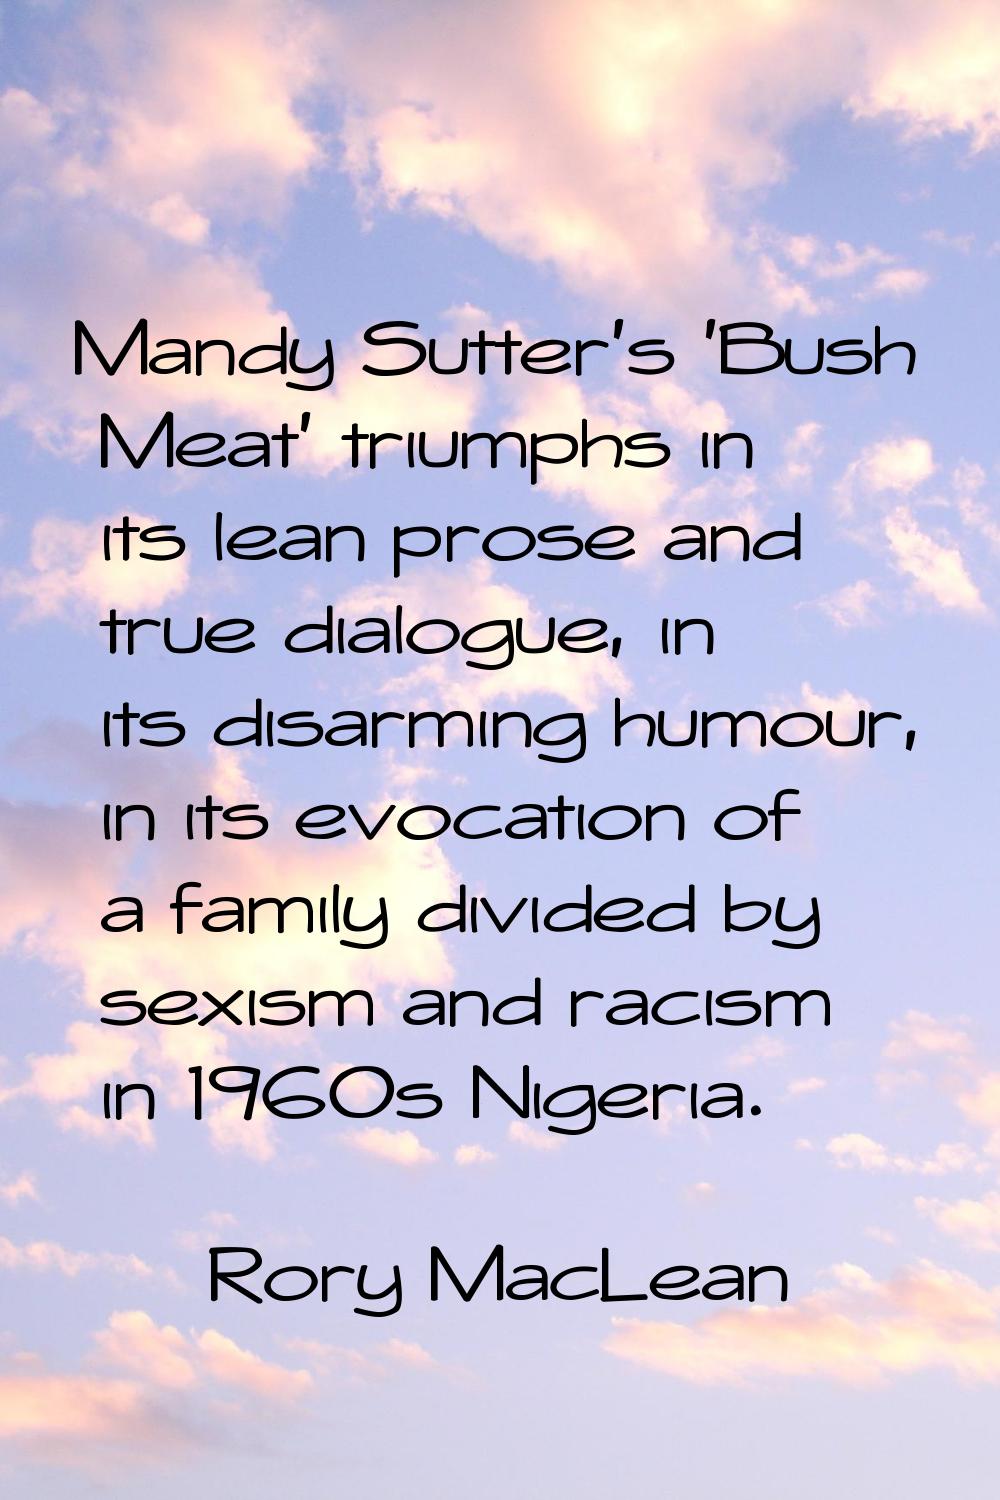 Mandy Sutter's 'Bush Meat' triumphs in its lean prose and true dialogue, in its disarming humour, i